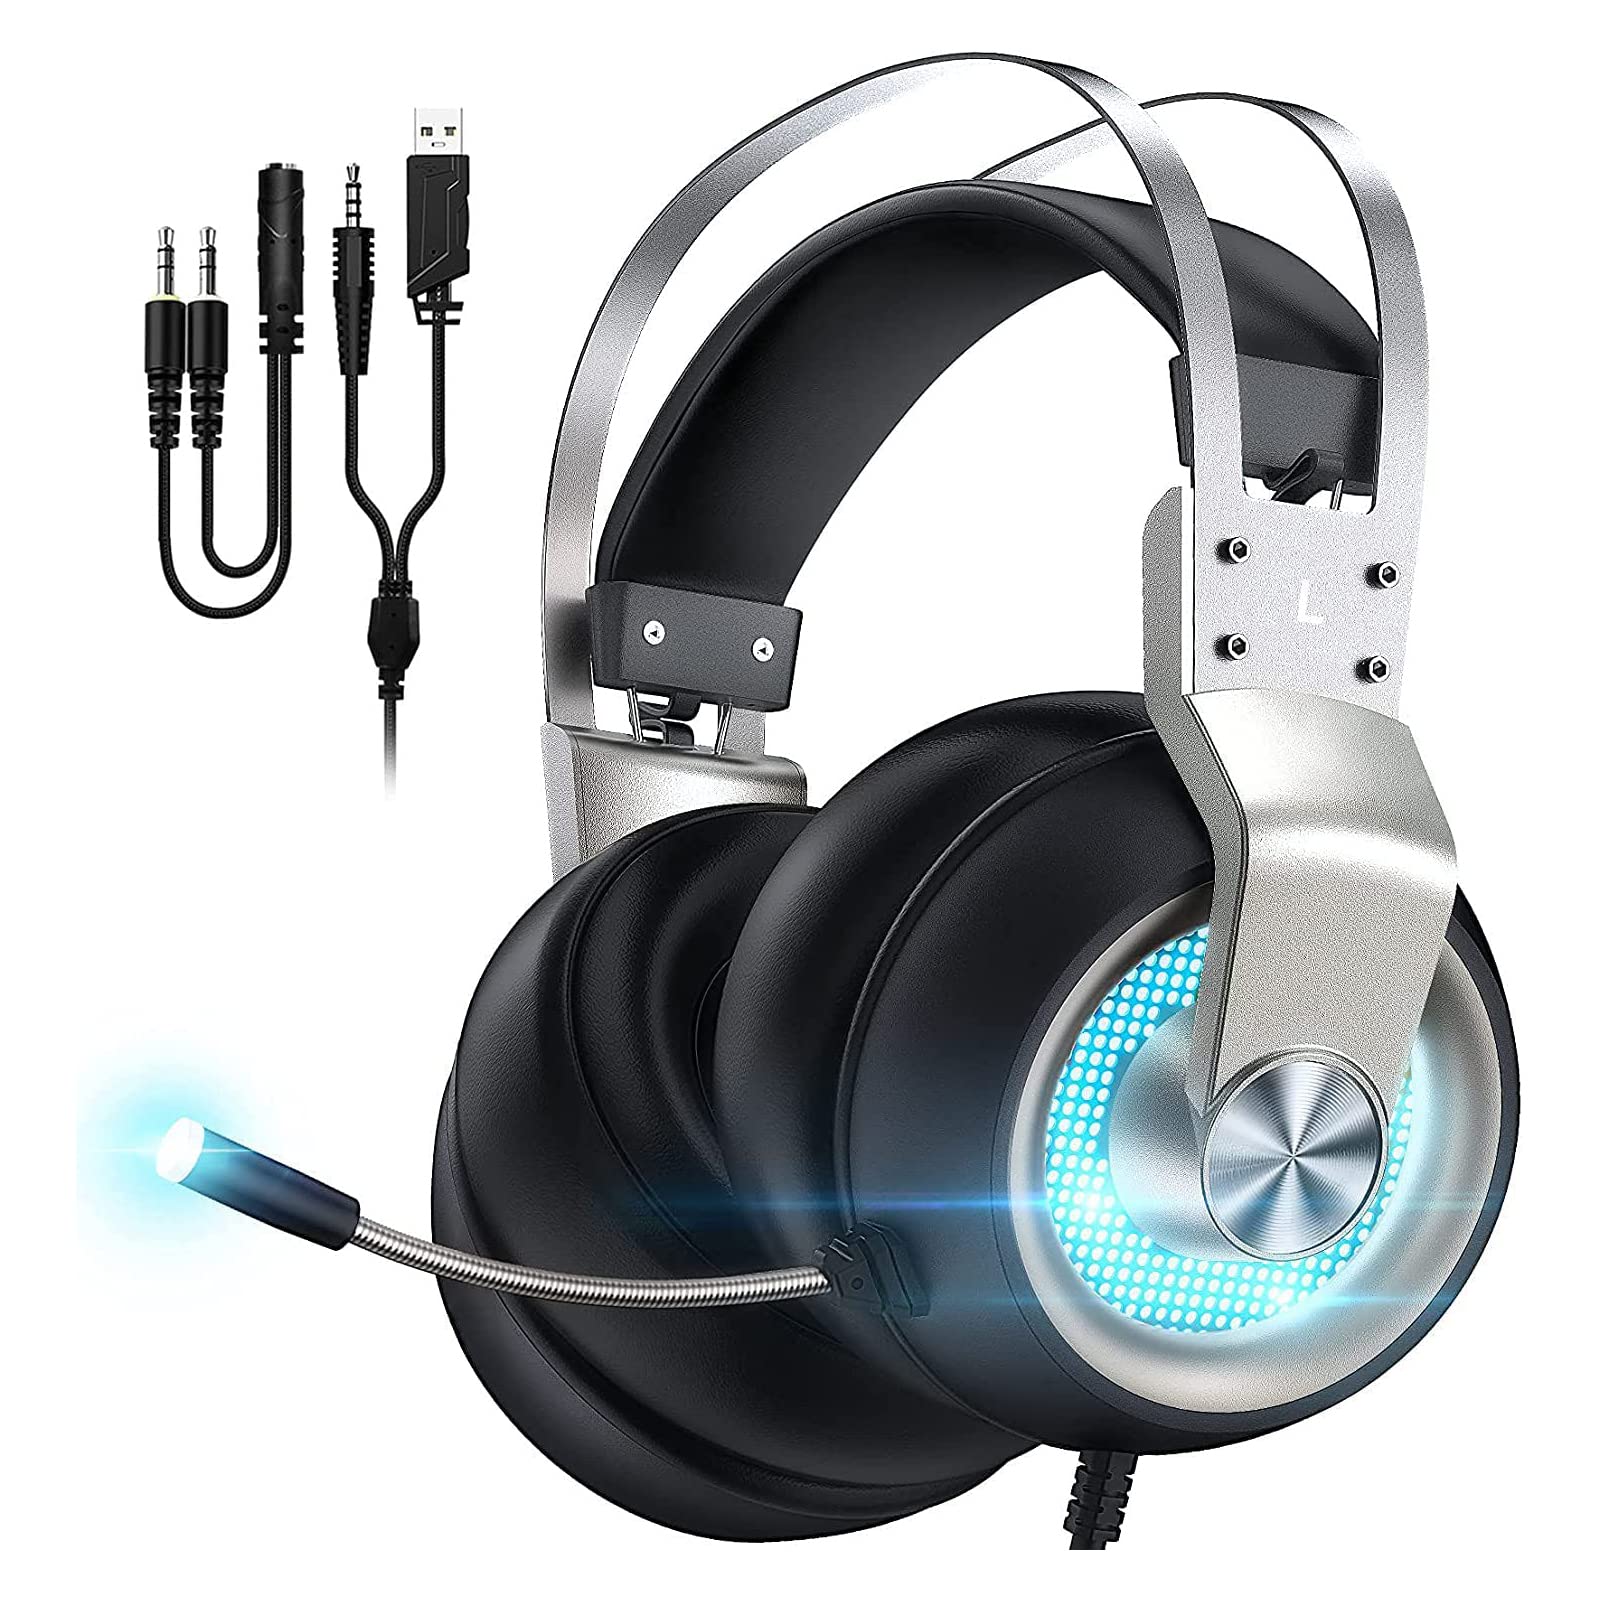 Clossity Gaming Headset for PC PS4 Xbox One, 7.1 Surround Sound, Noise Cancelling Mic, In-line Volume Control, Over-Ear Gaming Headset for PS5 Mac, 3.5mm Headset with LED Lights